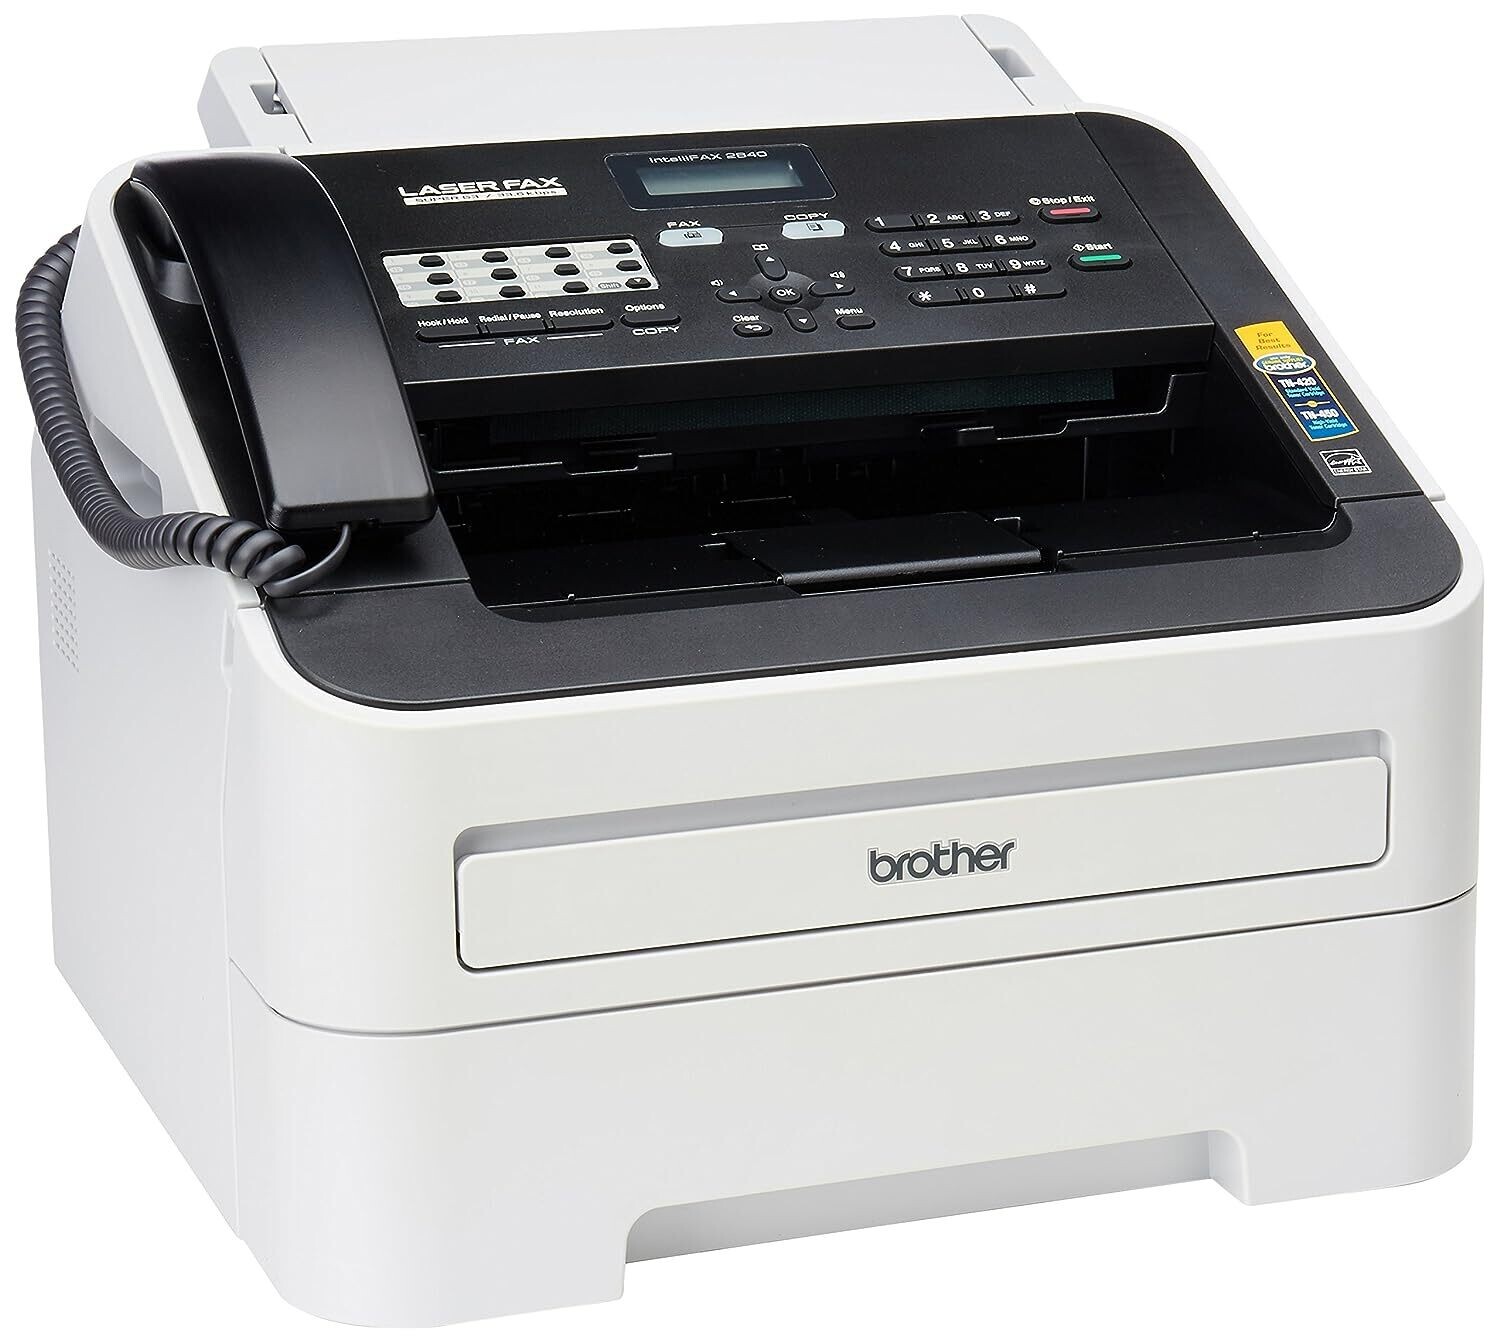 Brother FAX-2840 Monochrome Laser Printer with Copy & Fax